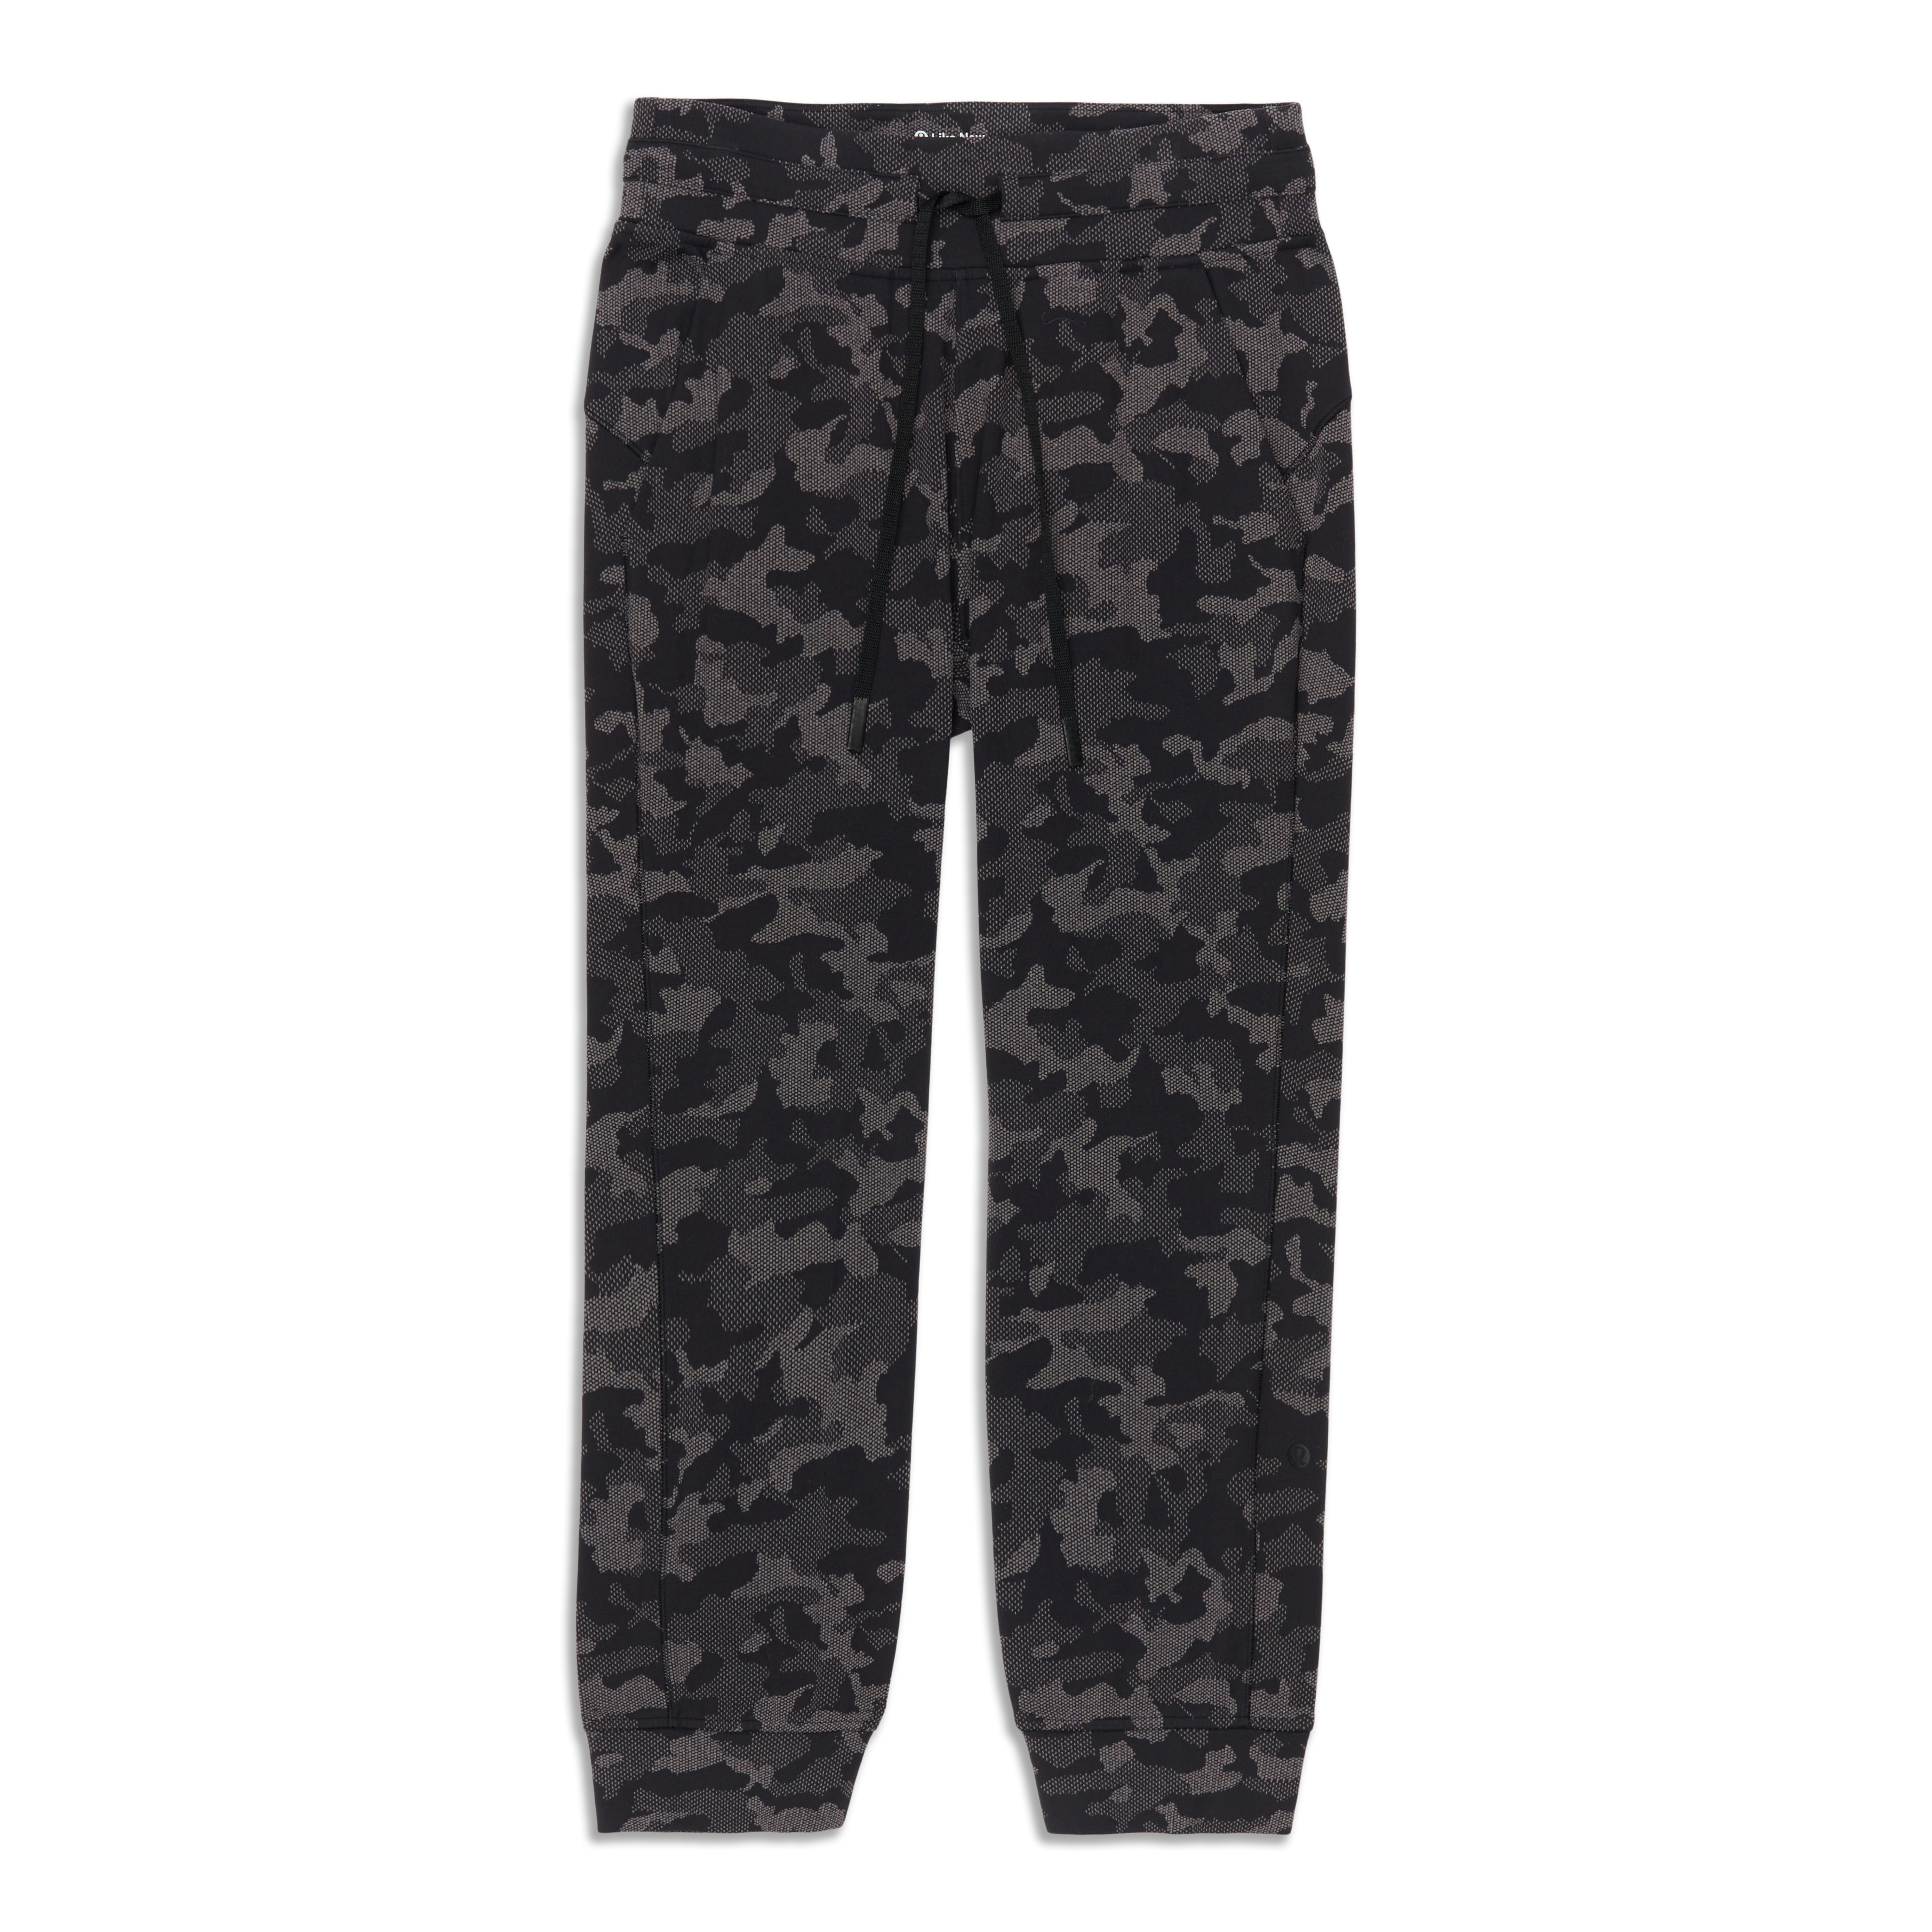 Anyone have the Ready to Rulu ( RTR) jogger in black? Does it fade